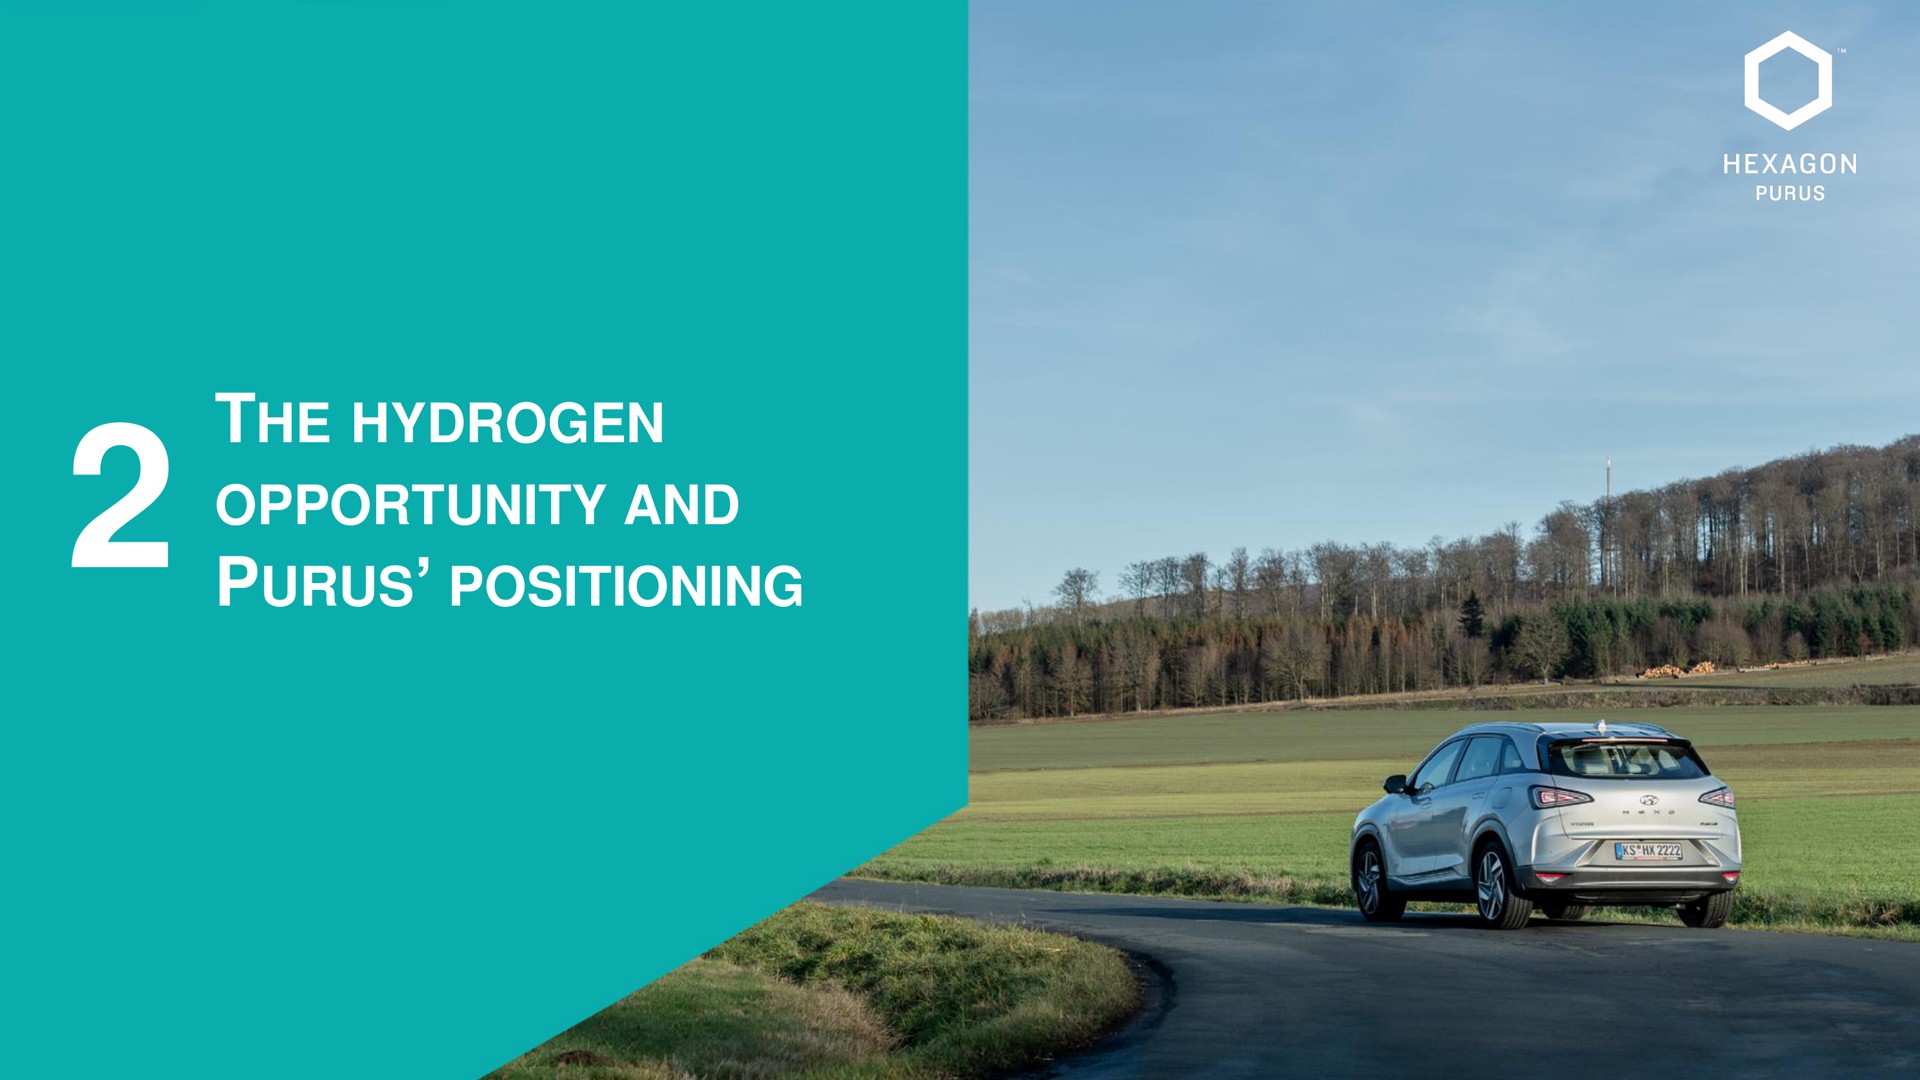 the hydrogen opportunity and positioning | Hexagon Purus